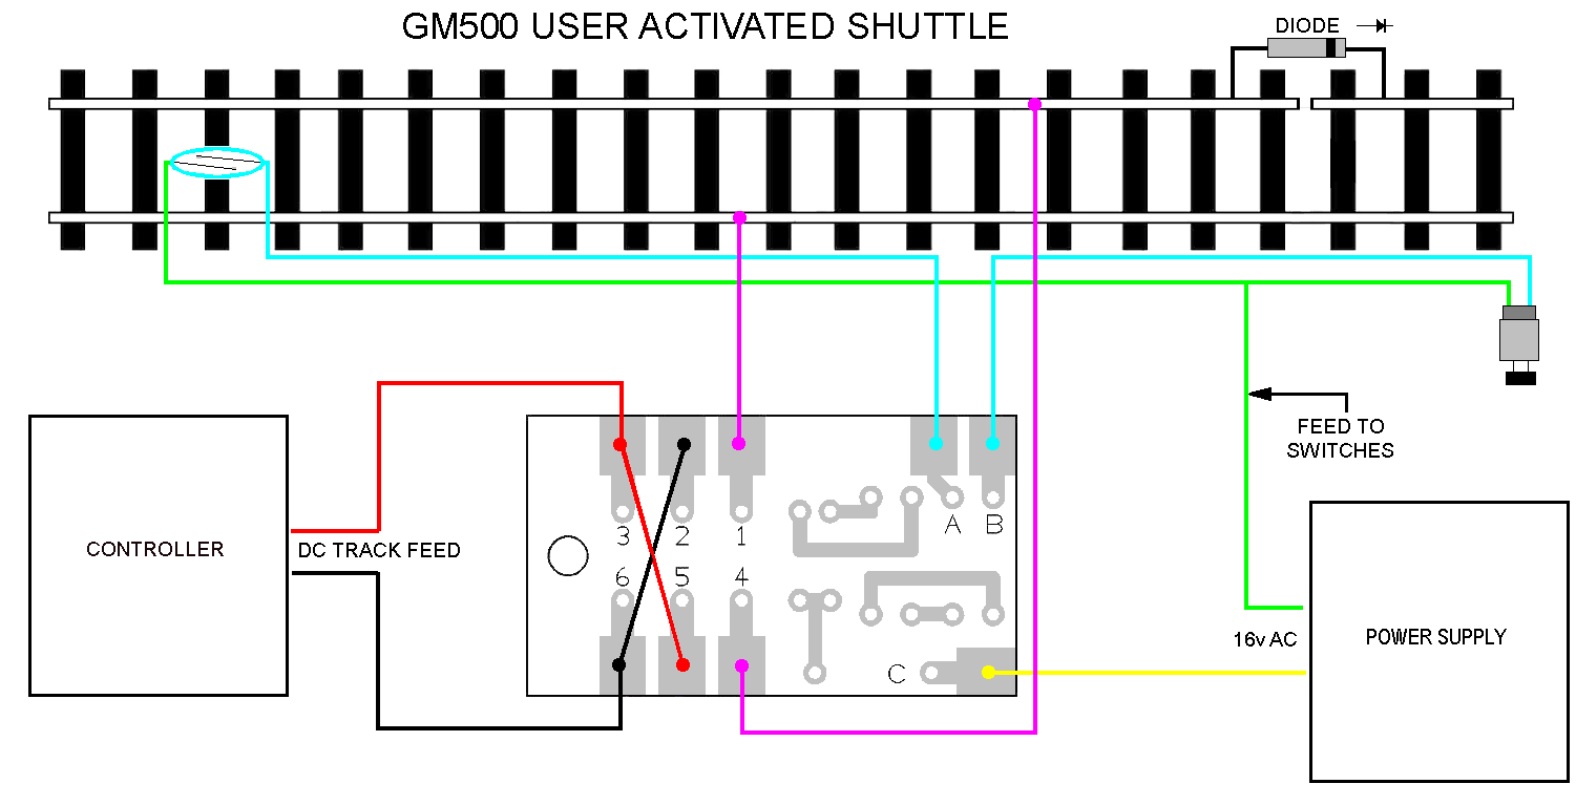 GM500 USER-ACTIVATED-SHUTTLE.